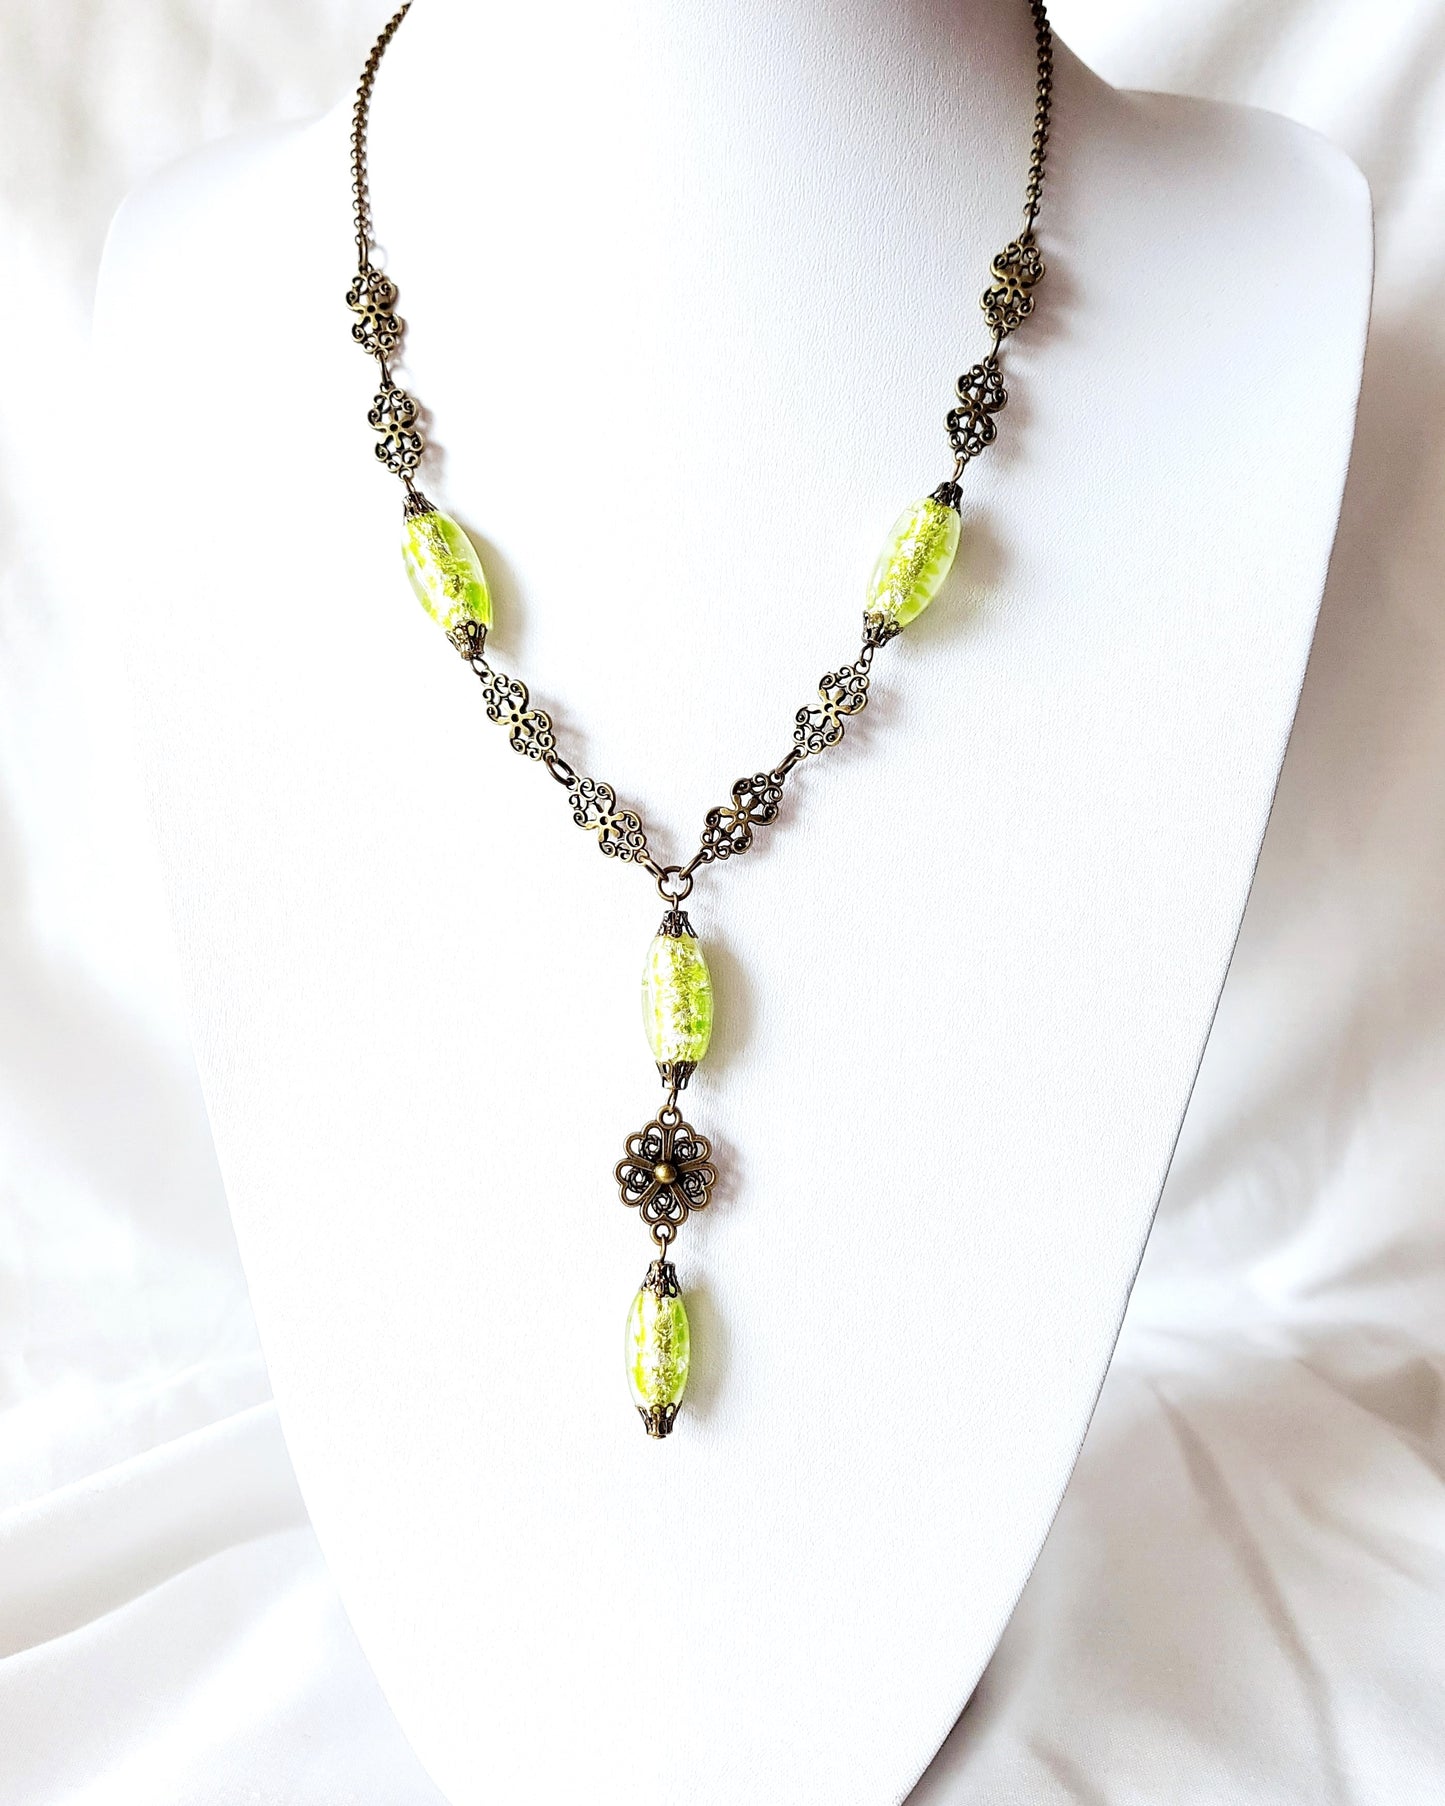    Lime Green Art Deco Fire Necklace-OOAK-Y Style Necklace-Vintage Foil Glass Beads-Antiqued Brass